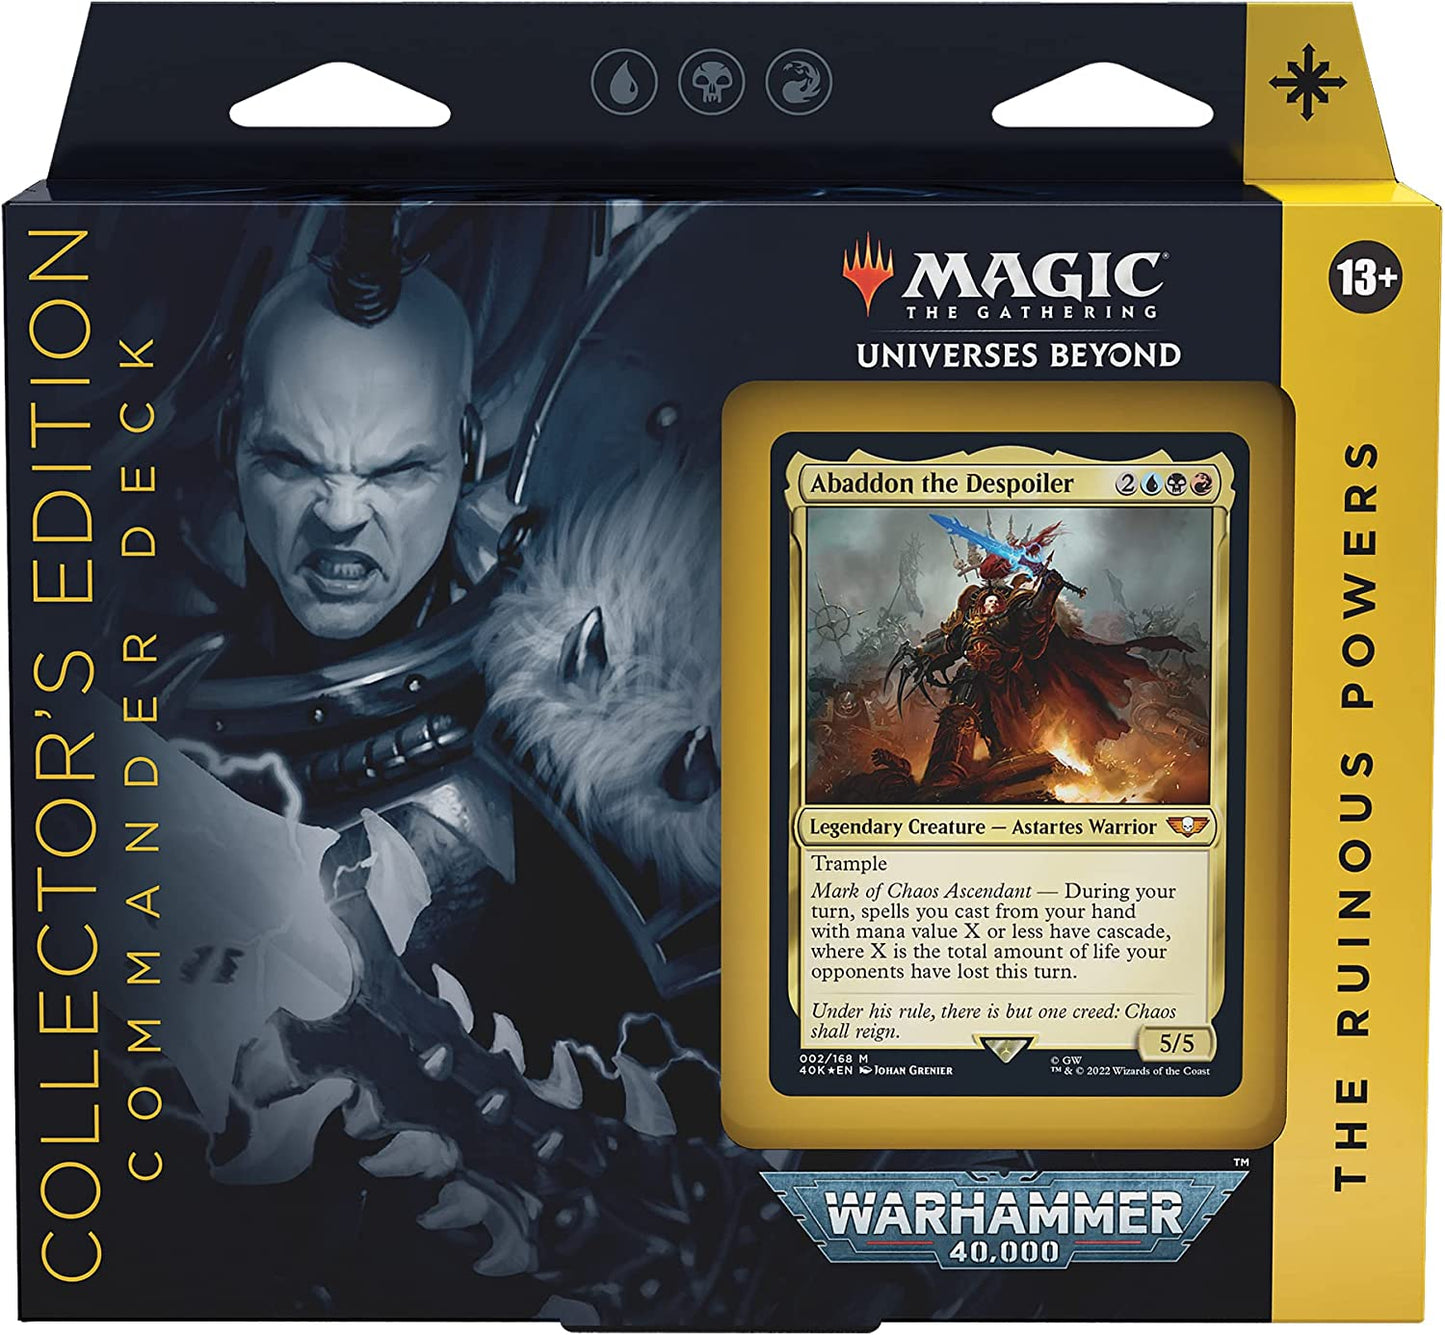 Magic: The Gathering Commander Deck - Universes Beyond: Warhammer 40,000 (Foil Collectors Edition) - The Ruinous Powers